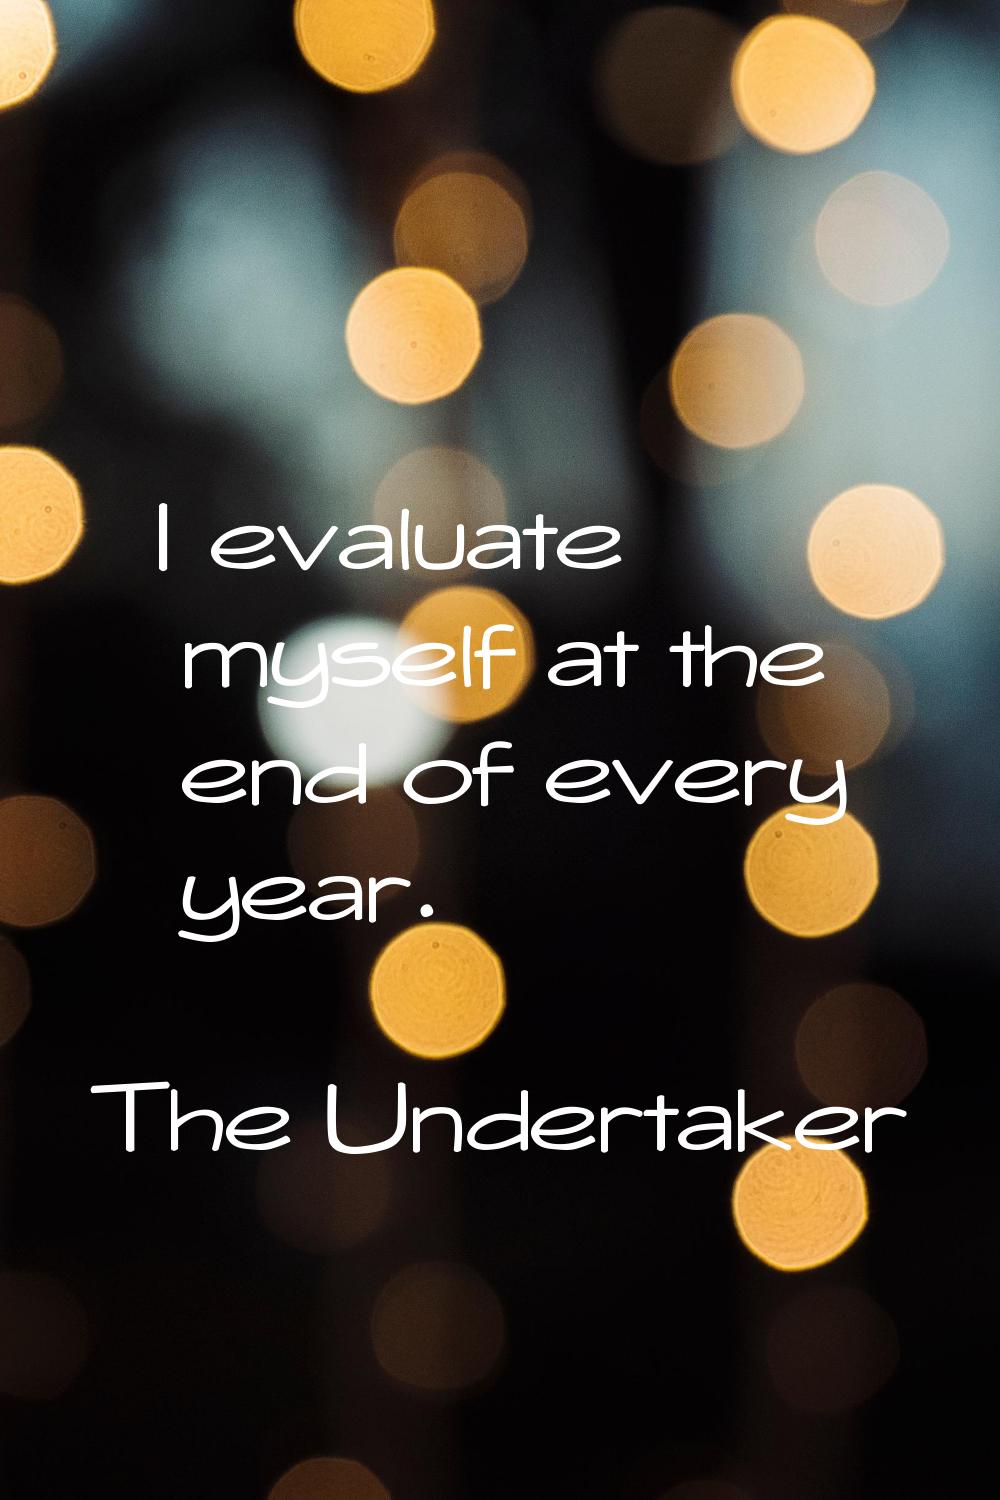 I evaluate myself at the end of every year.